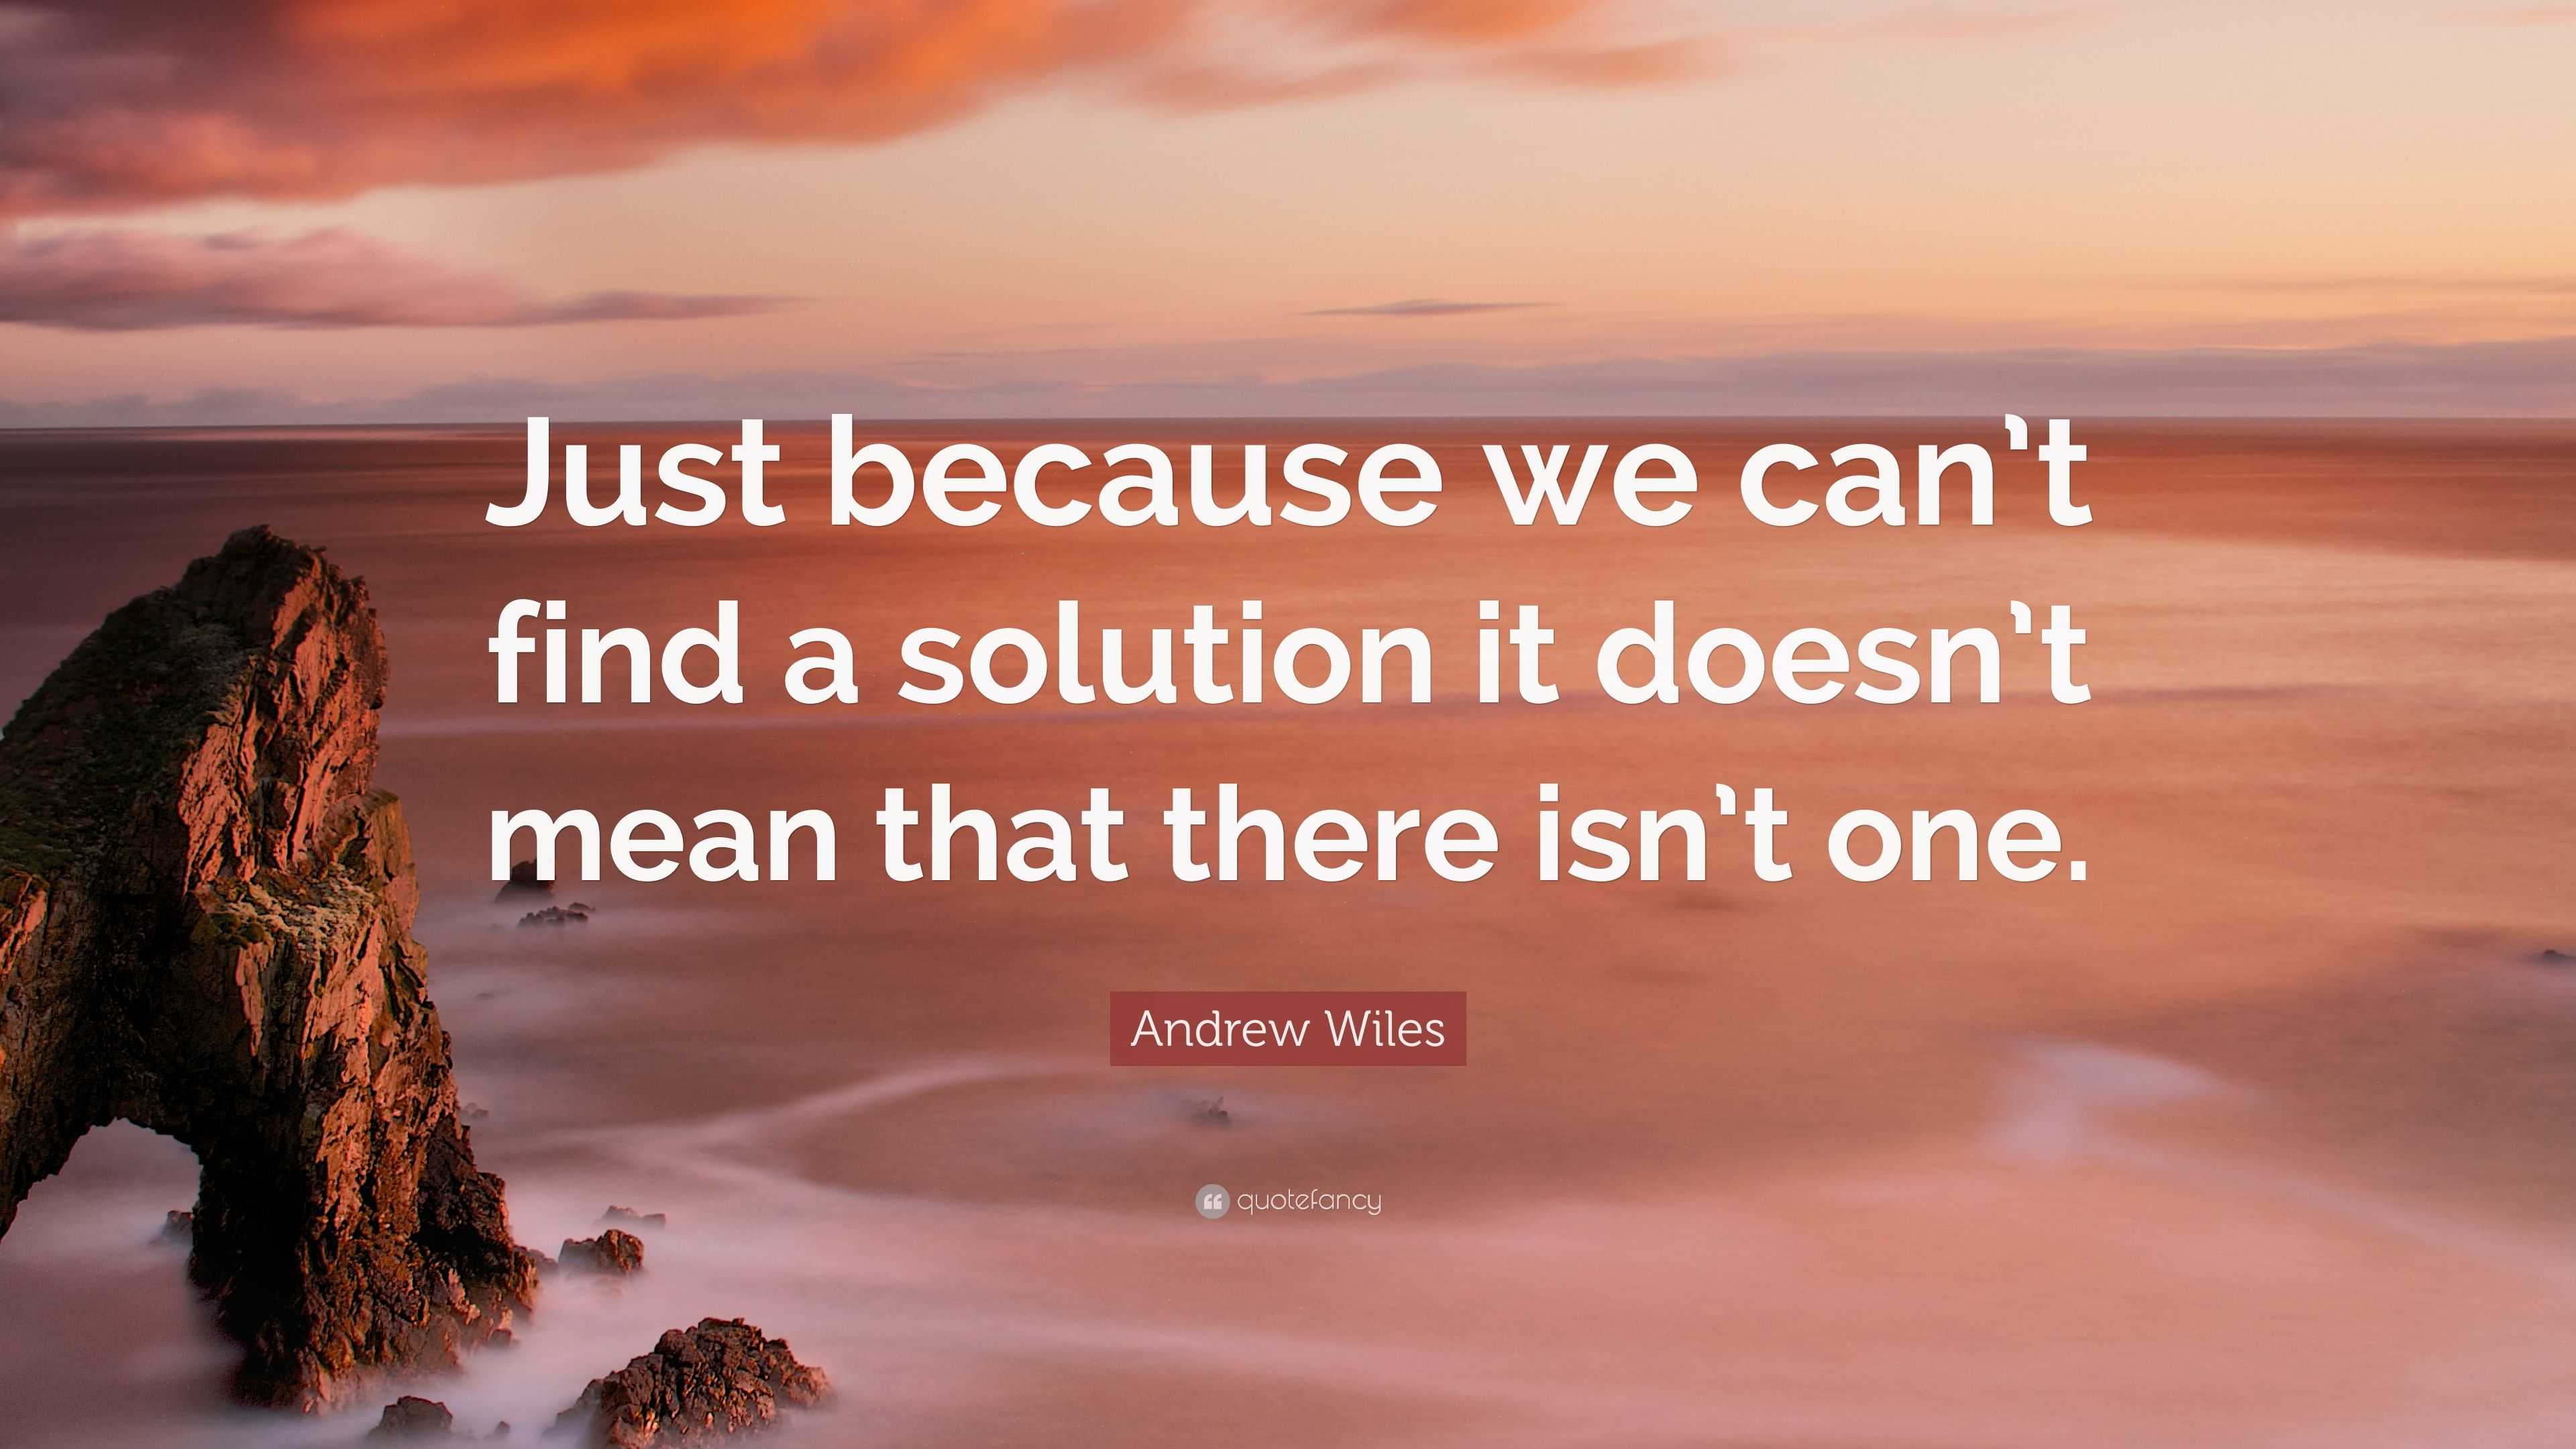 Colleen Patrick-Goudreau Quote: “Just because we can doesn’t mean we ...